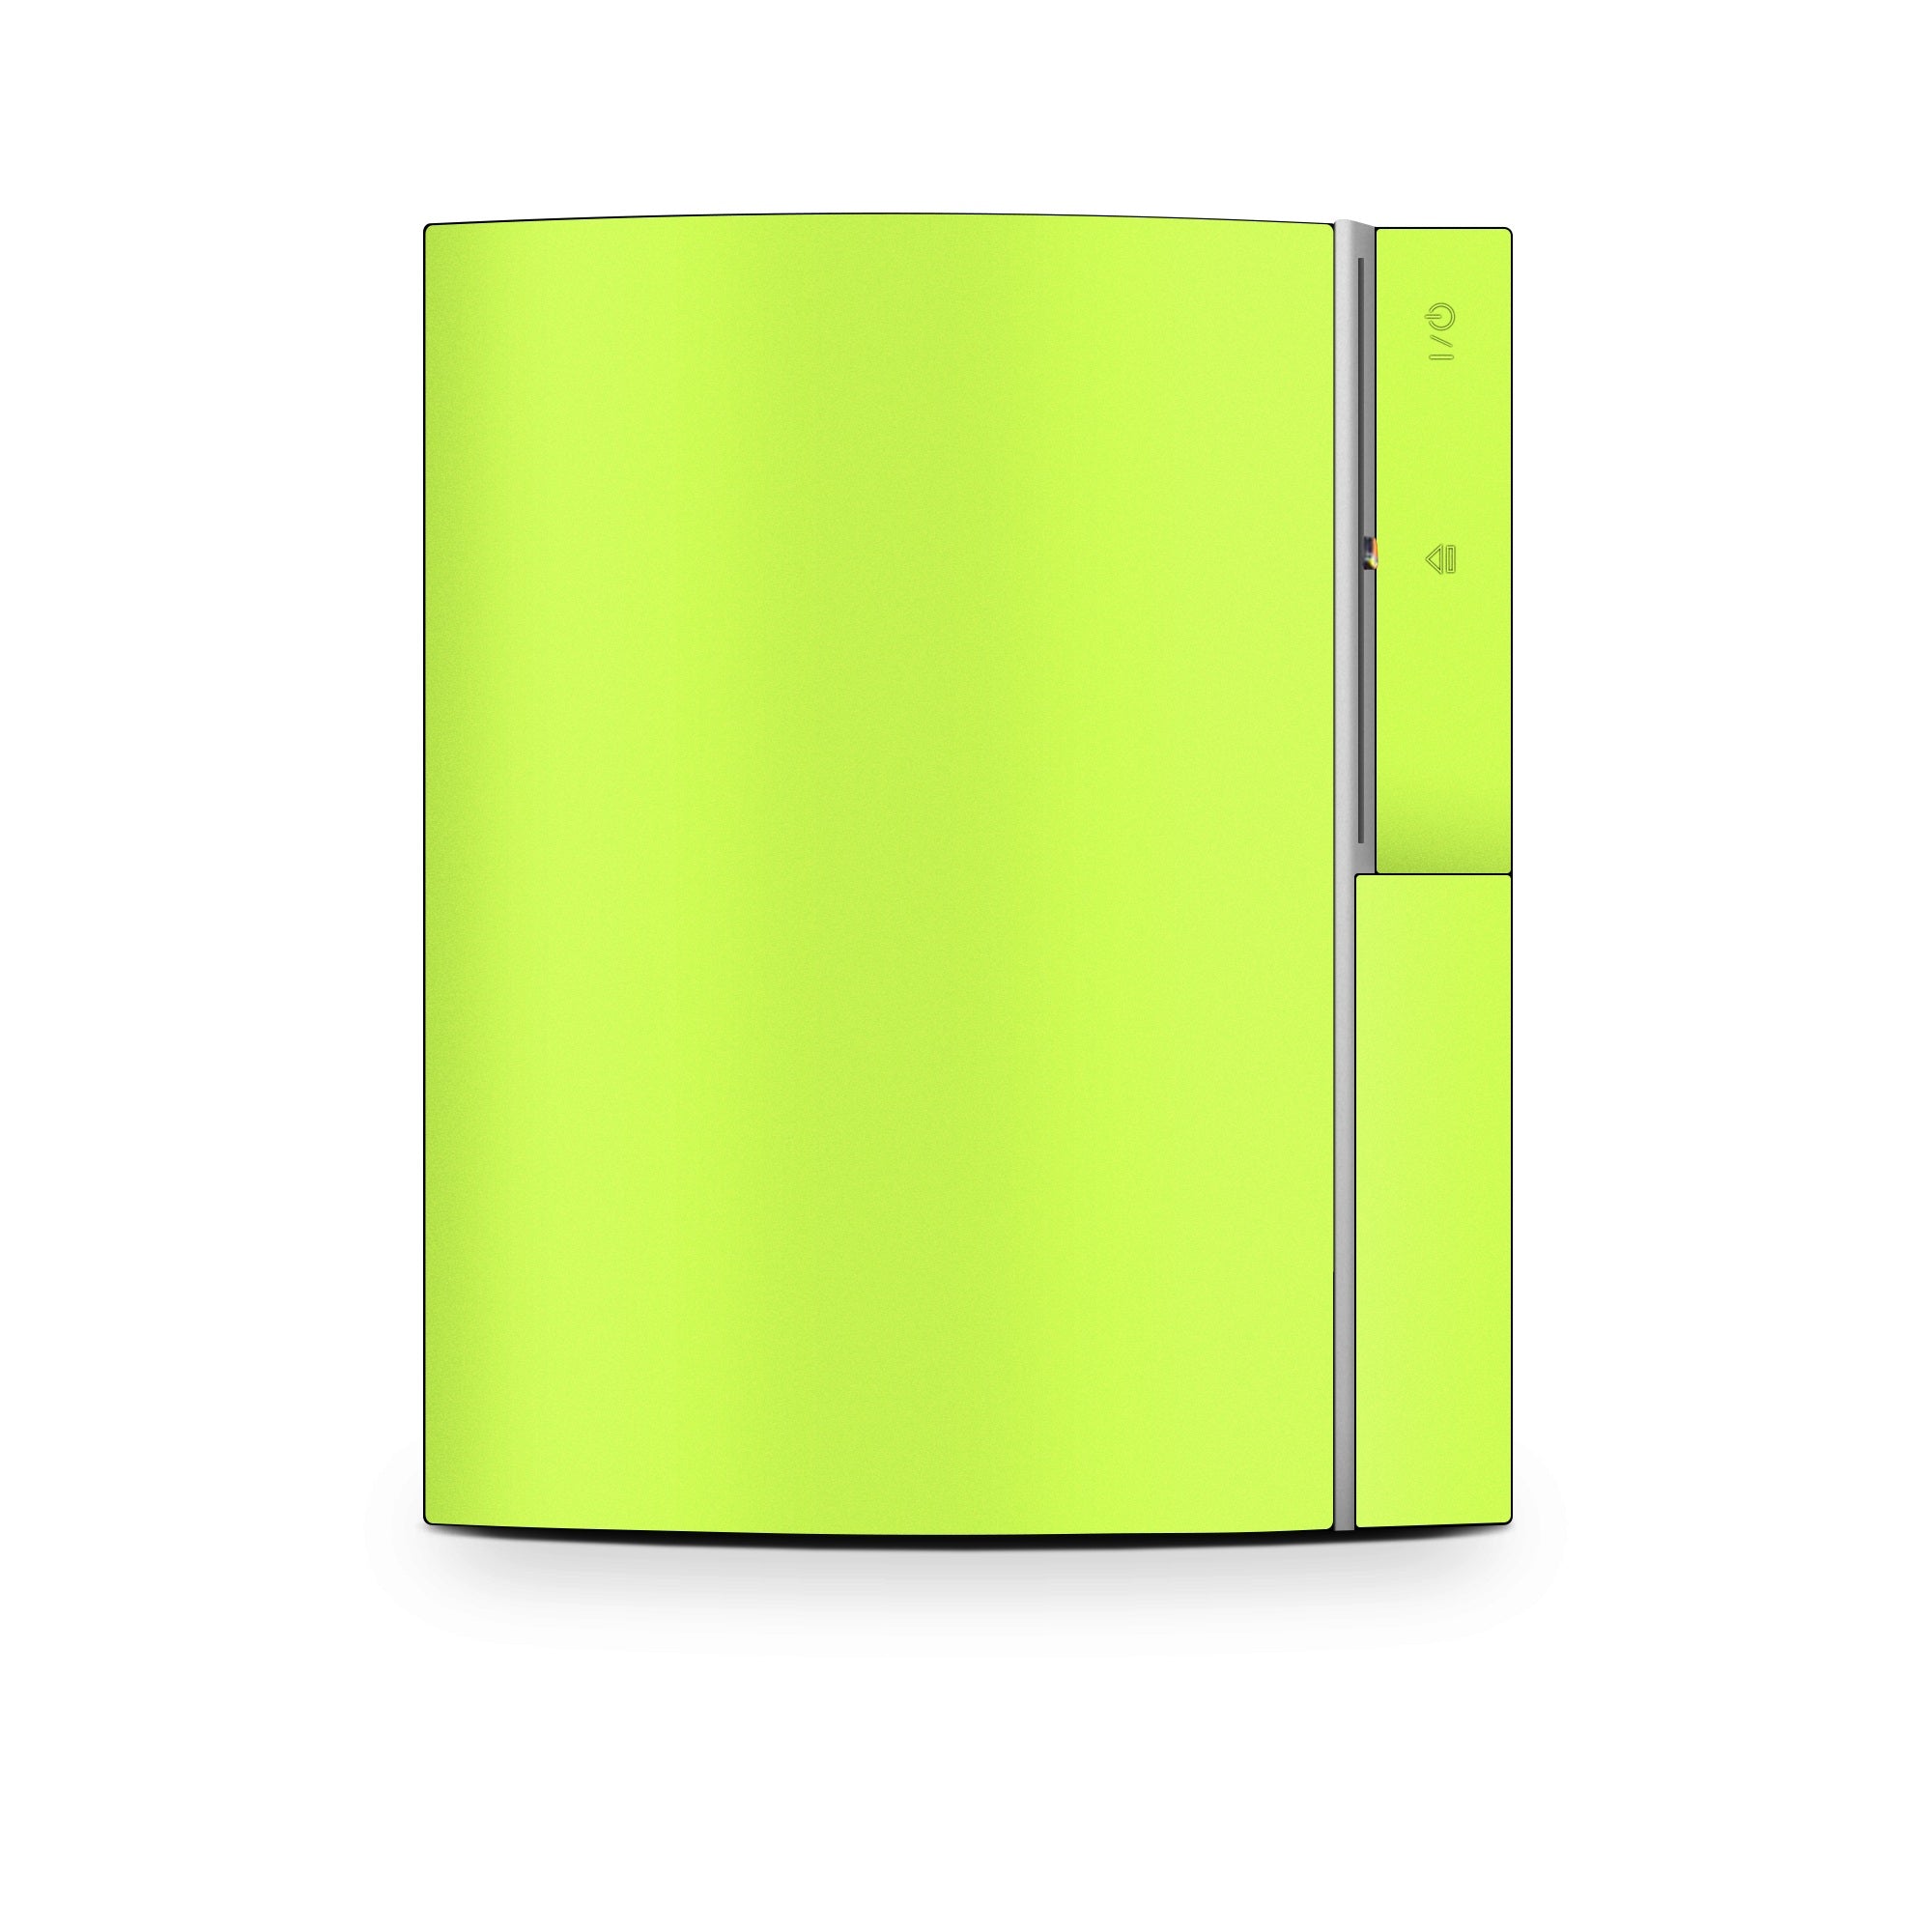 Solid State Lime - Sony PS3 Skin